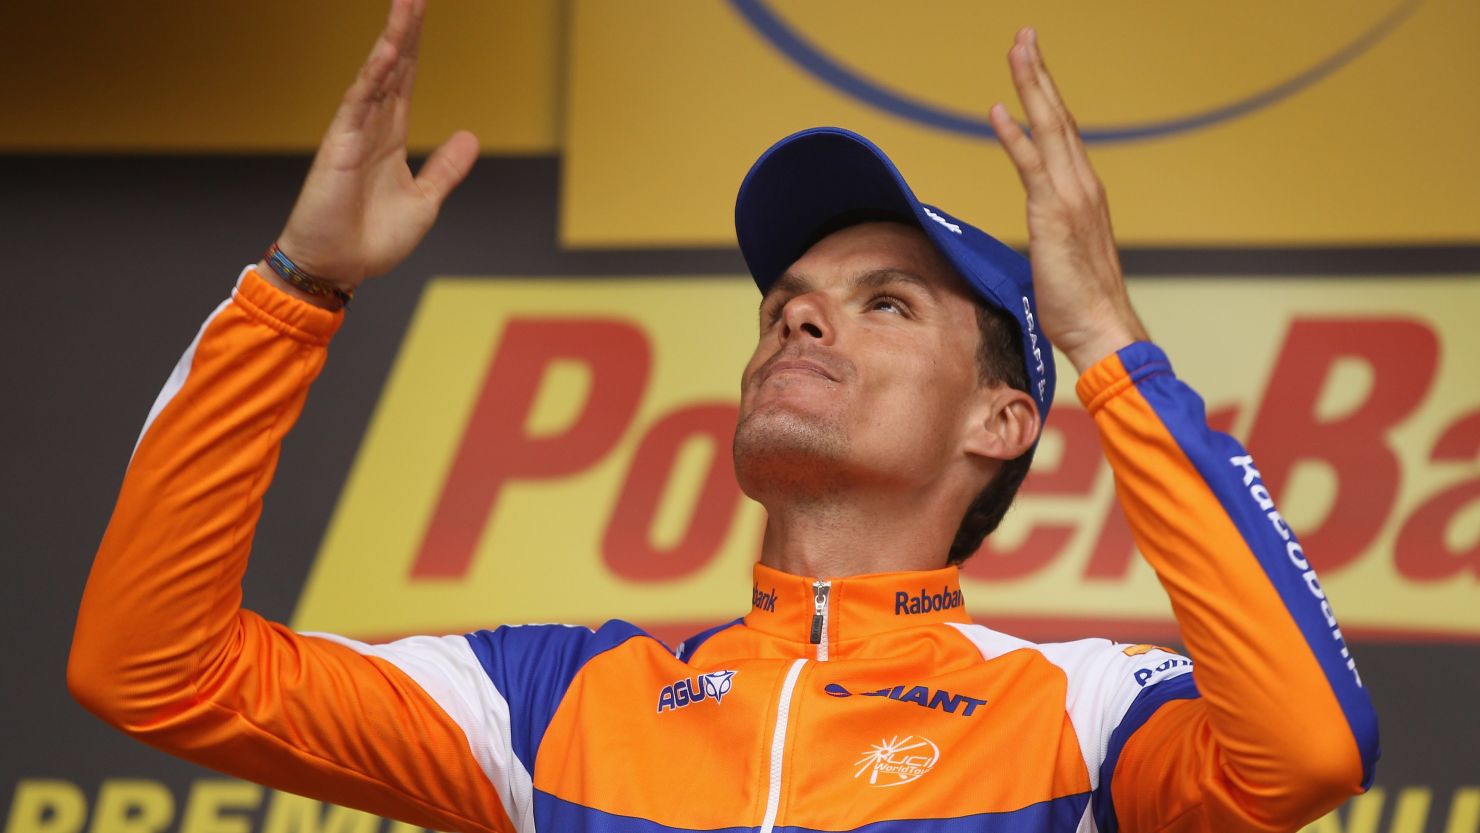 Luis Leon Sanchez celebrates victory for his Rabobank team on a day of drama in the 14th stage of the Tour de France